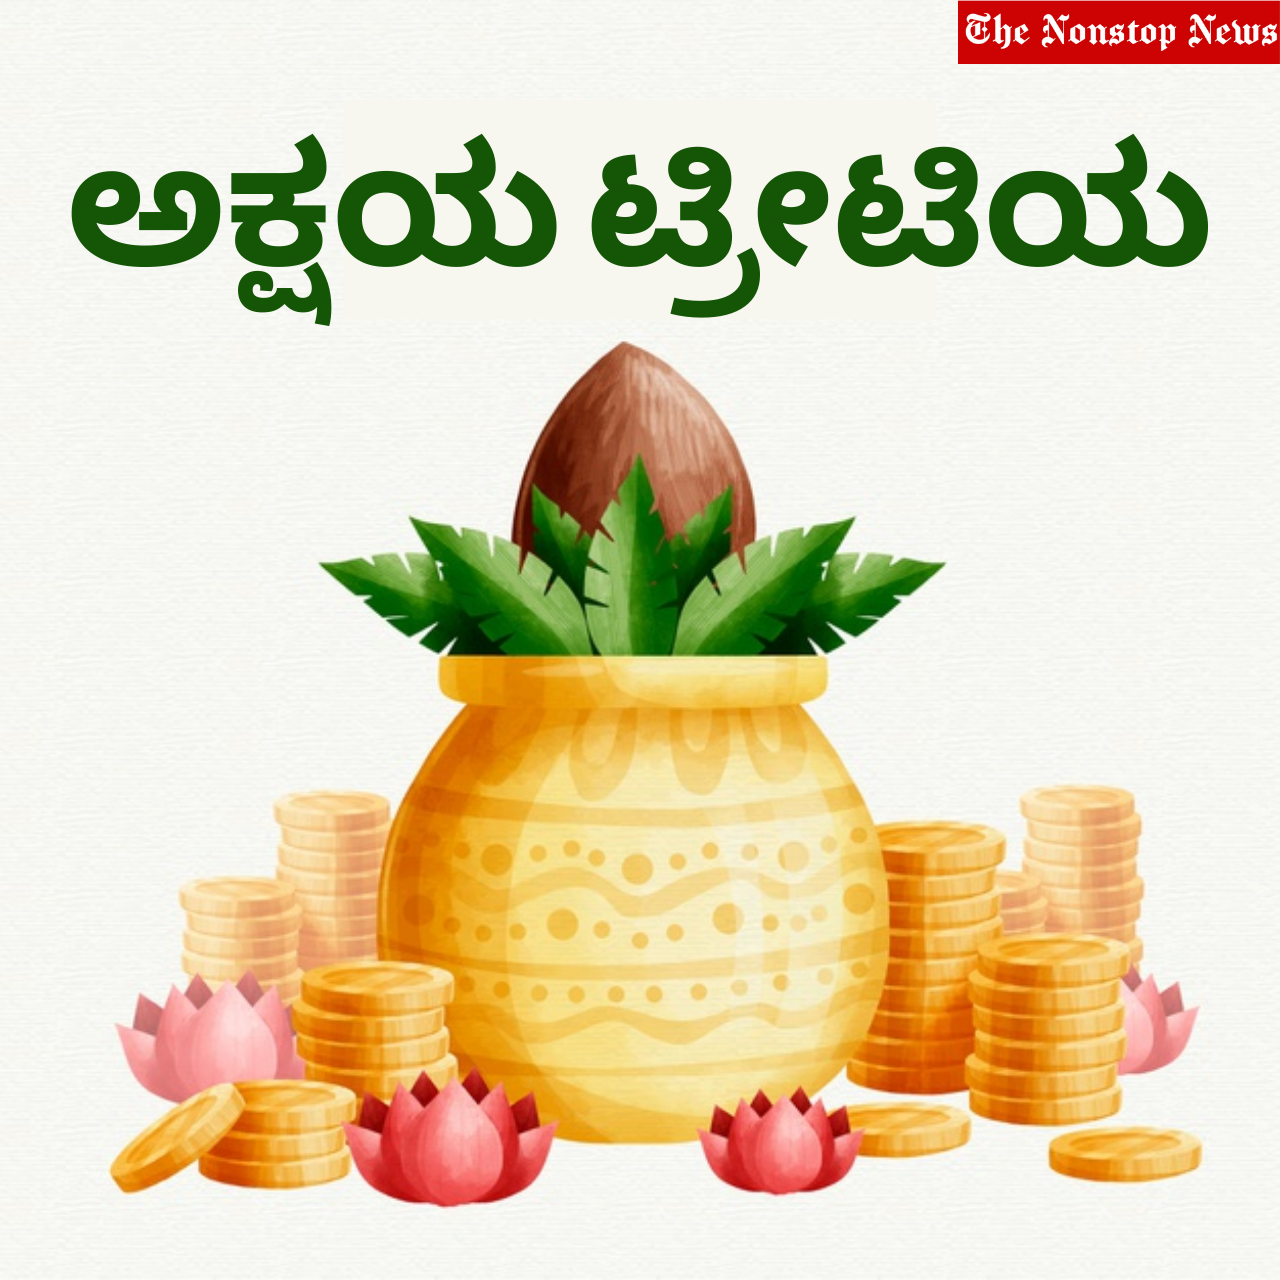 Akshaya Tritiya 2021 wishes in Kannada and Bengali Quotes, Images, messages, and greetings to share